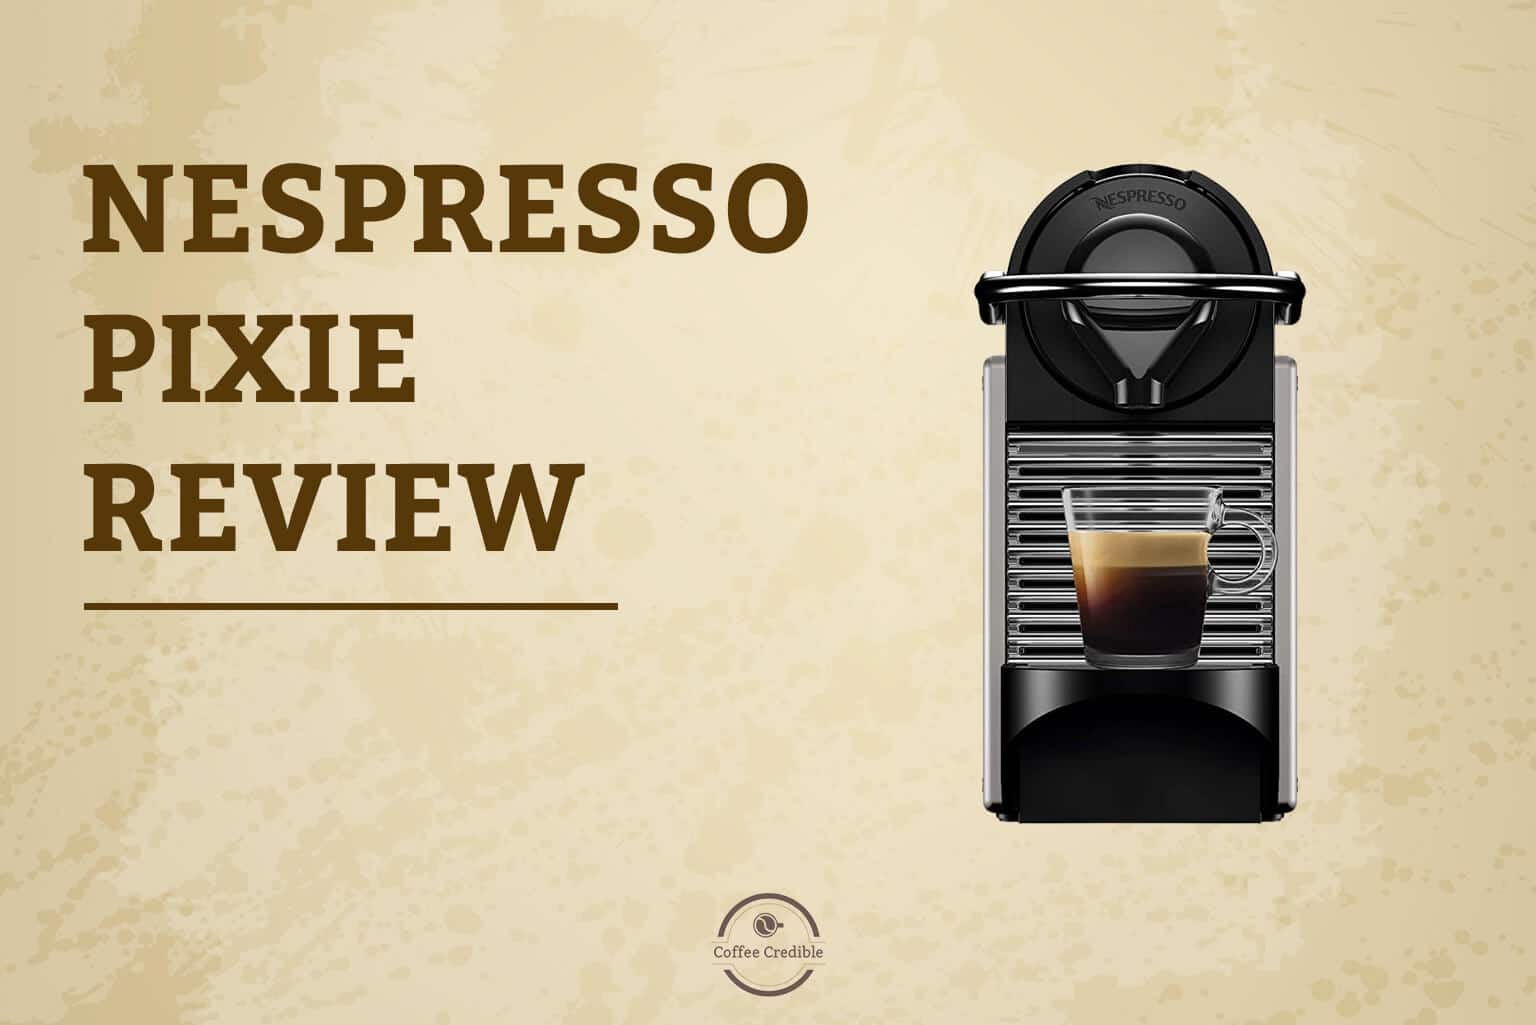 Nespresso Pixie Review [Tried & Tested] in 2022